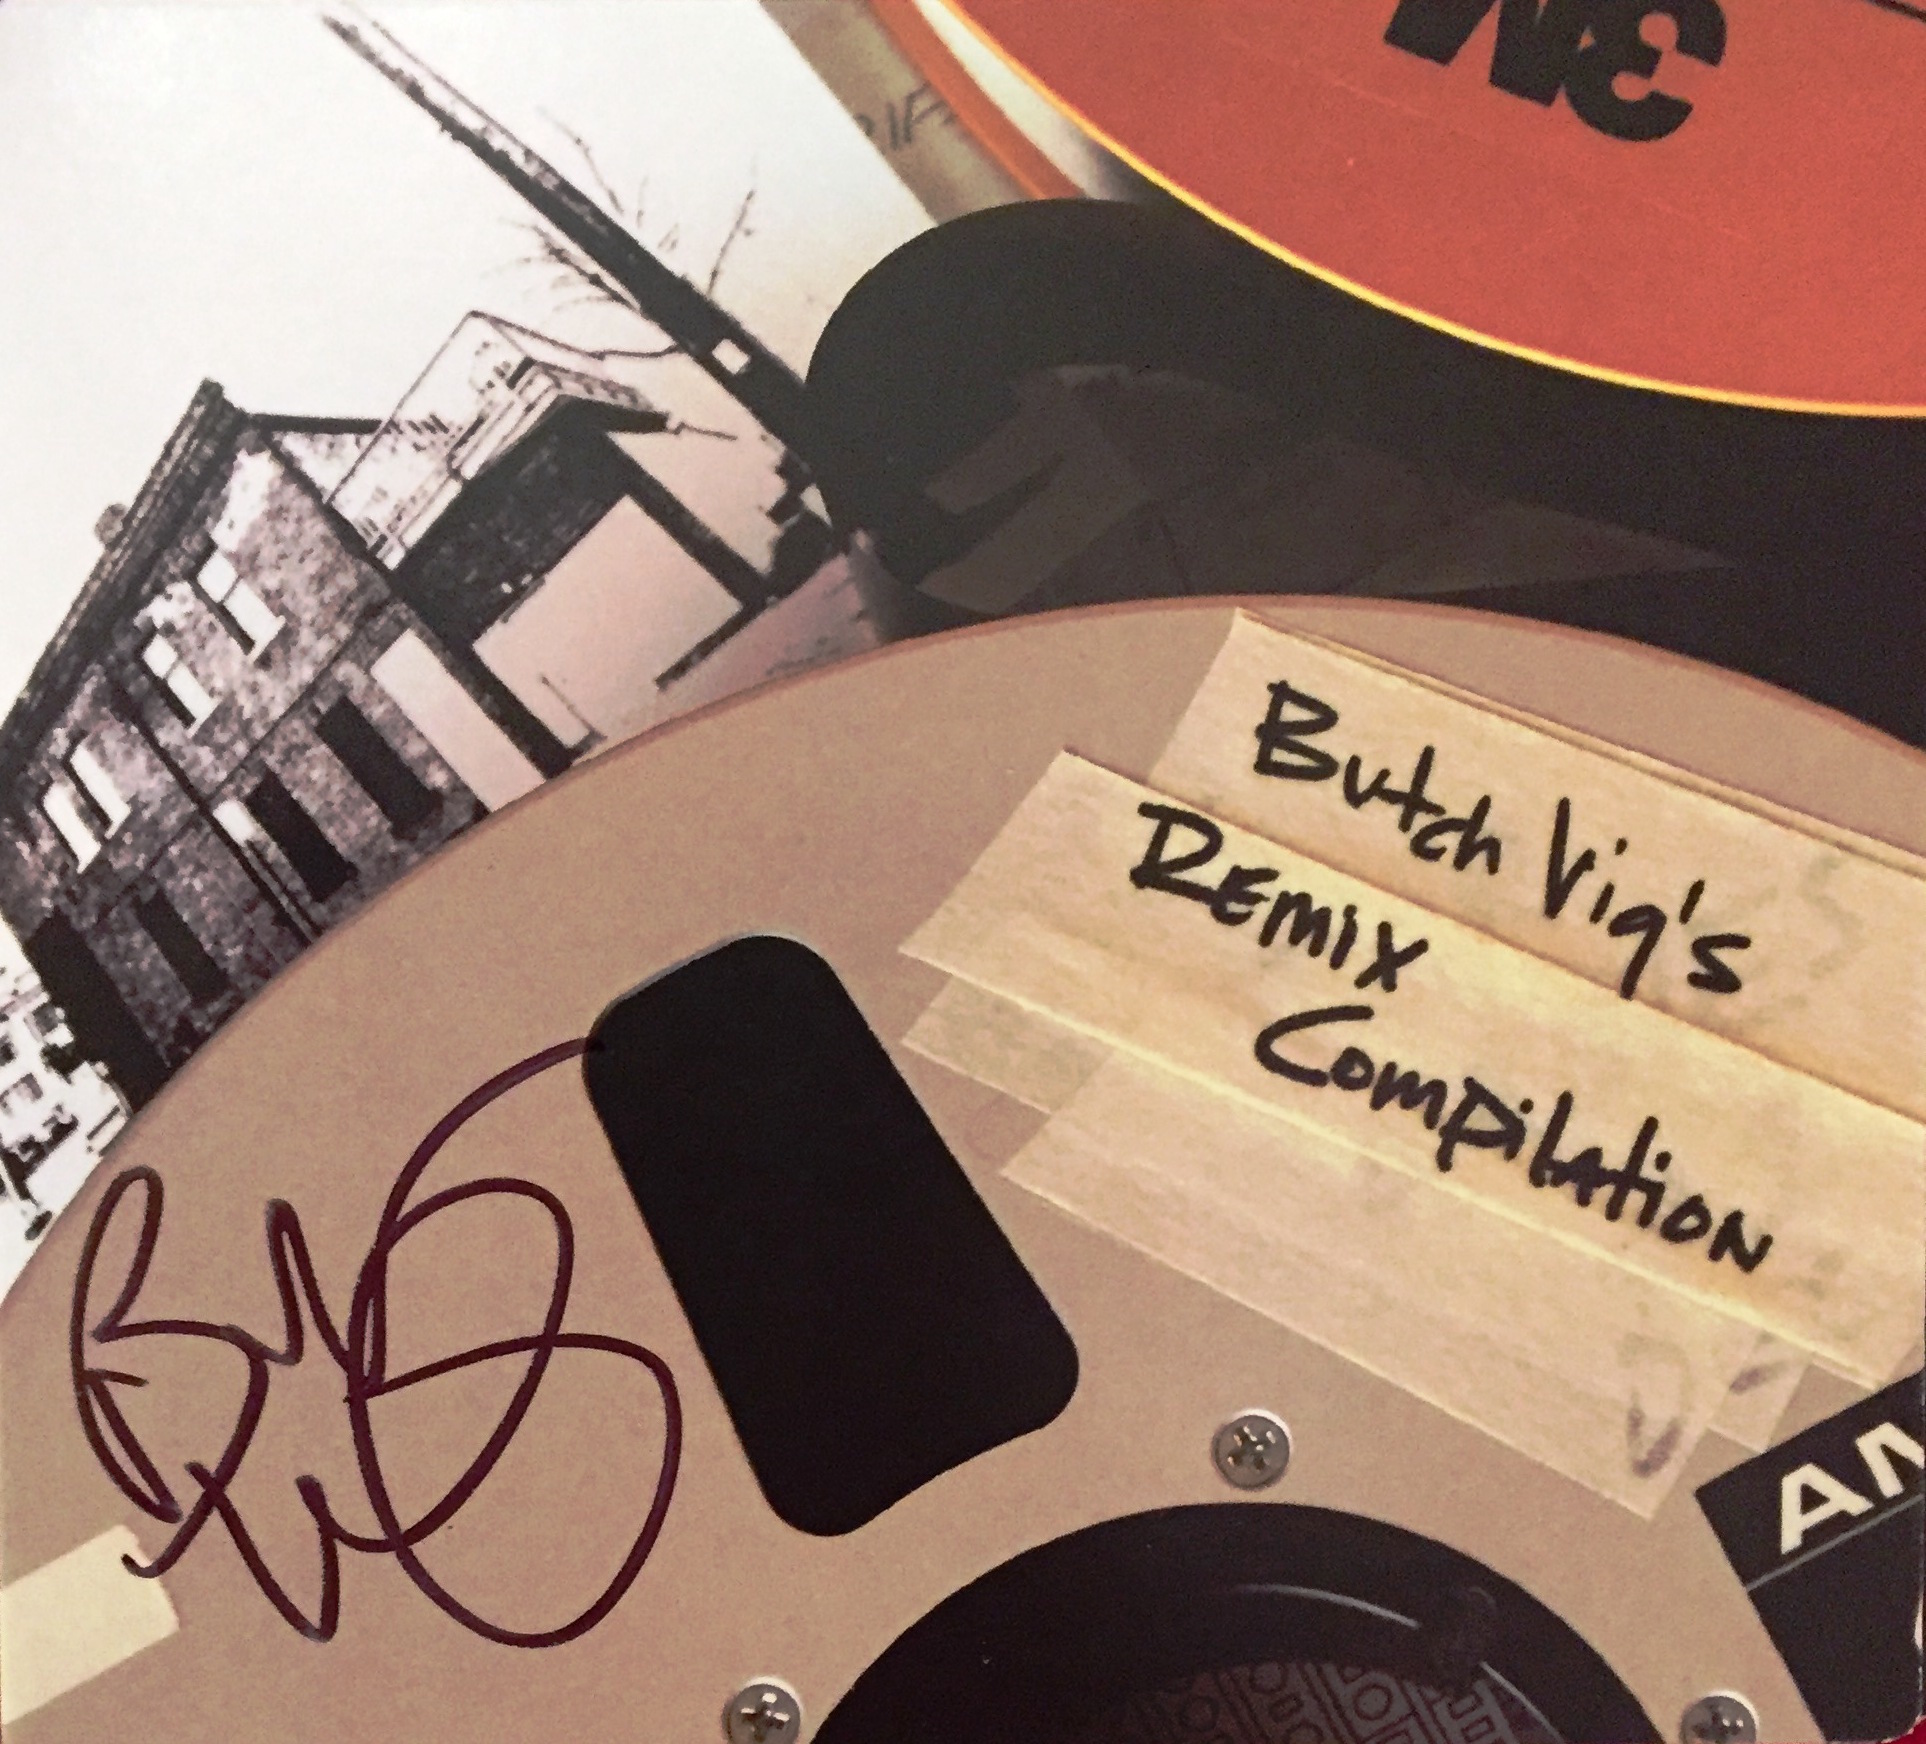 butch-vig-remix-cd-front-cover-only